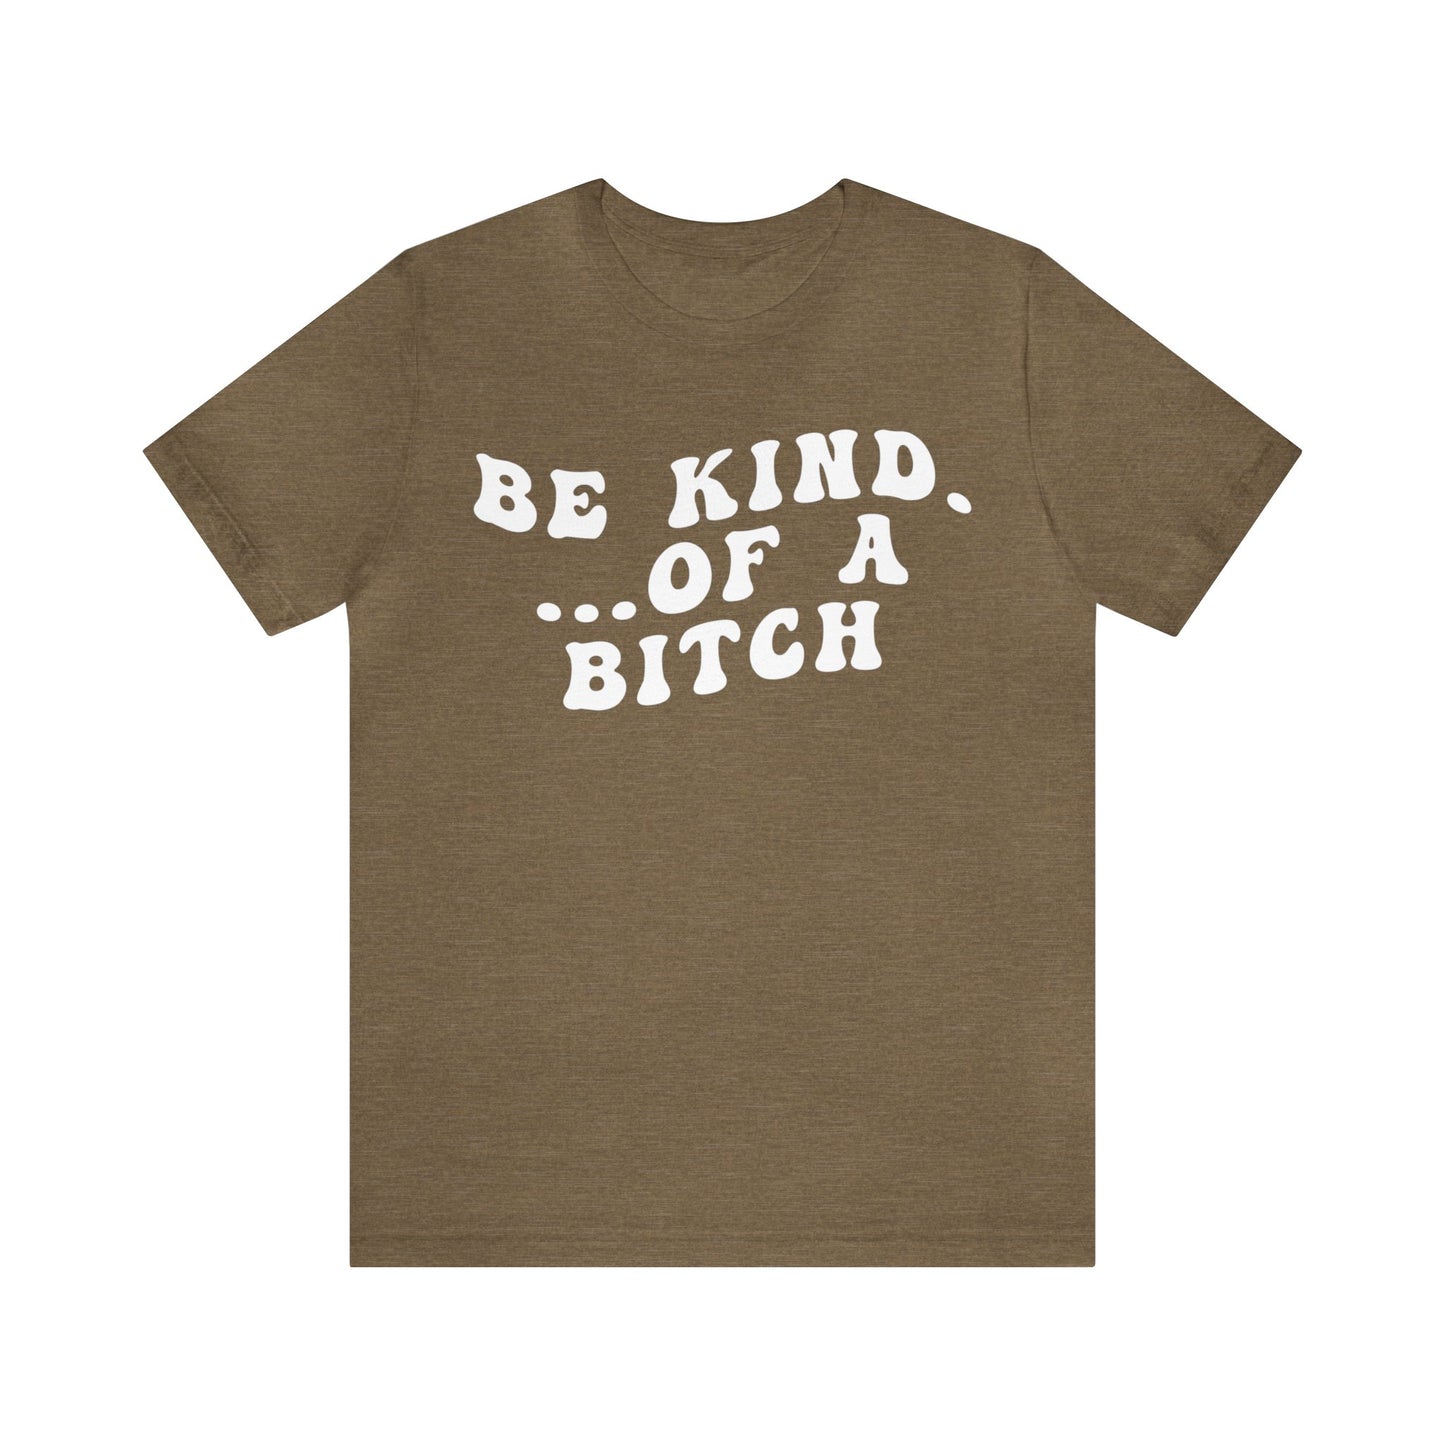 Be Kind Of A Bitch Shirt, Funny Girls Shirt, Funny Sassy Shirt, Sarcasm Shirt for Women, Funny Gift for Friends, Gift For Girls, T1197